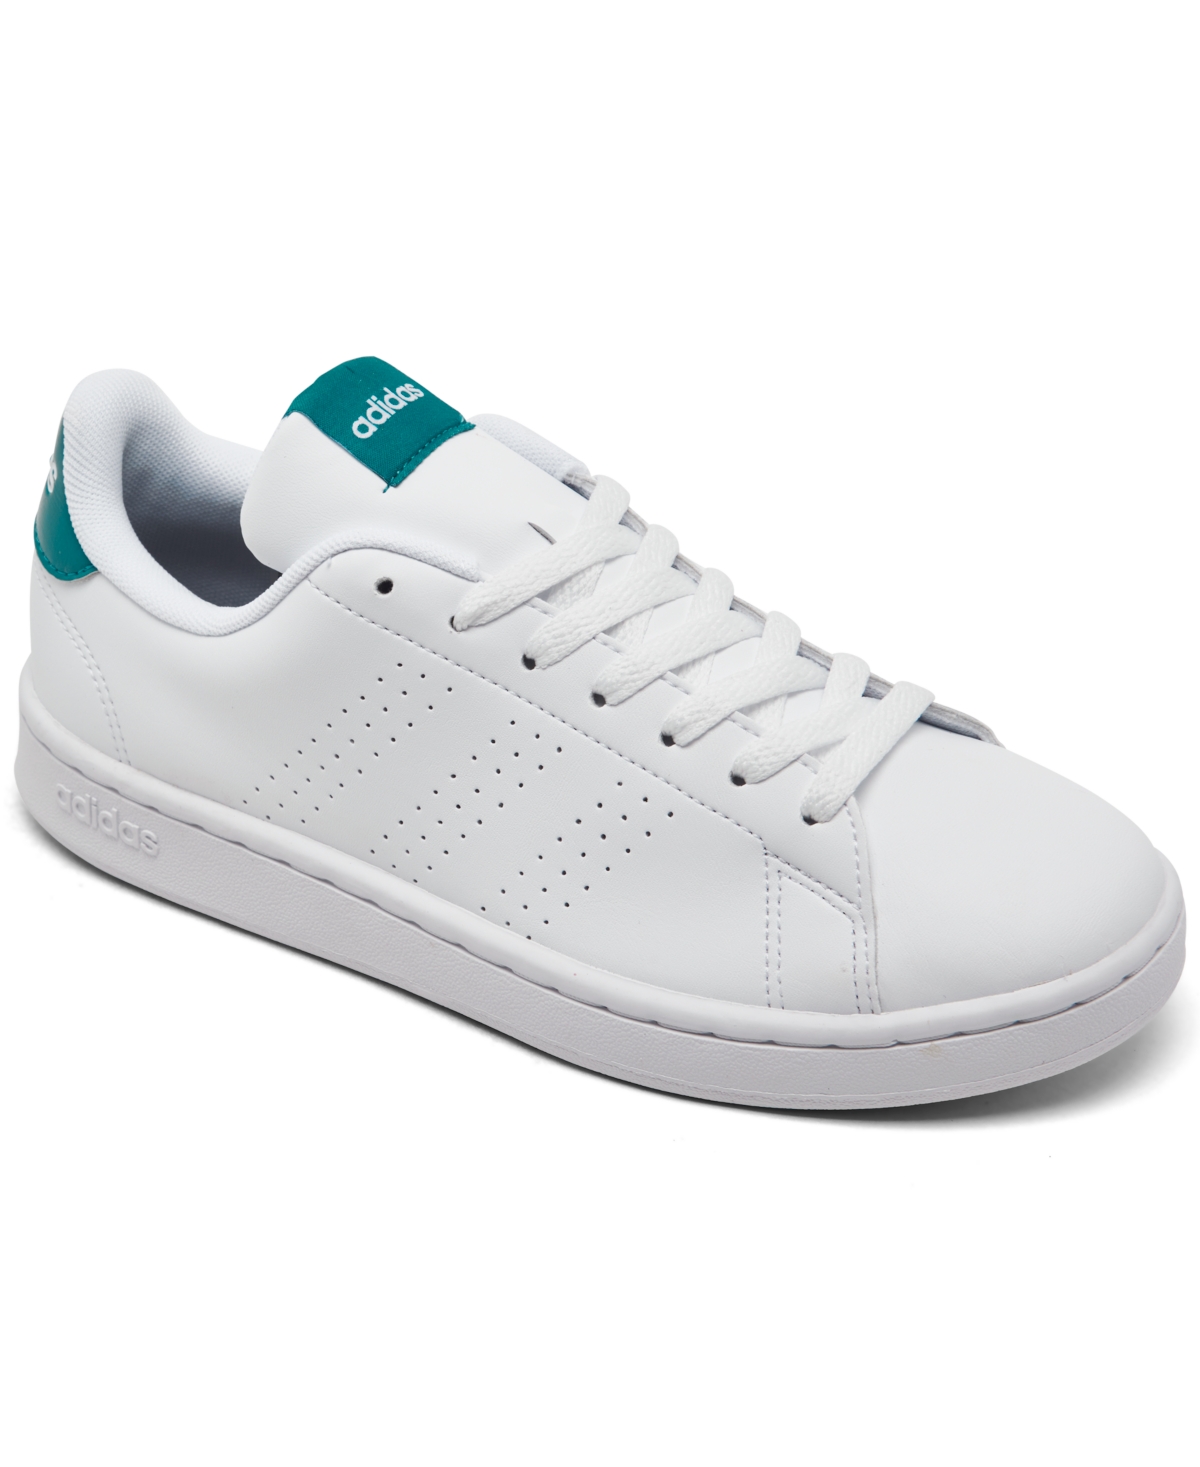 Adidas Originals Women's Advantage Casual Sneakers From Finish Line In White